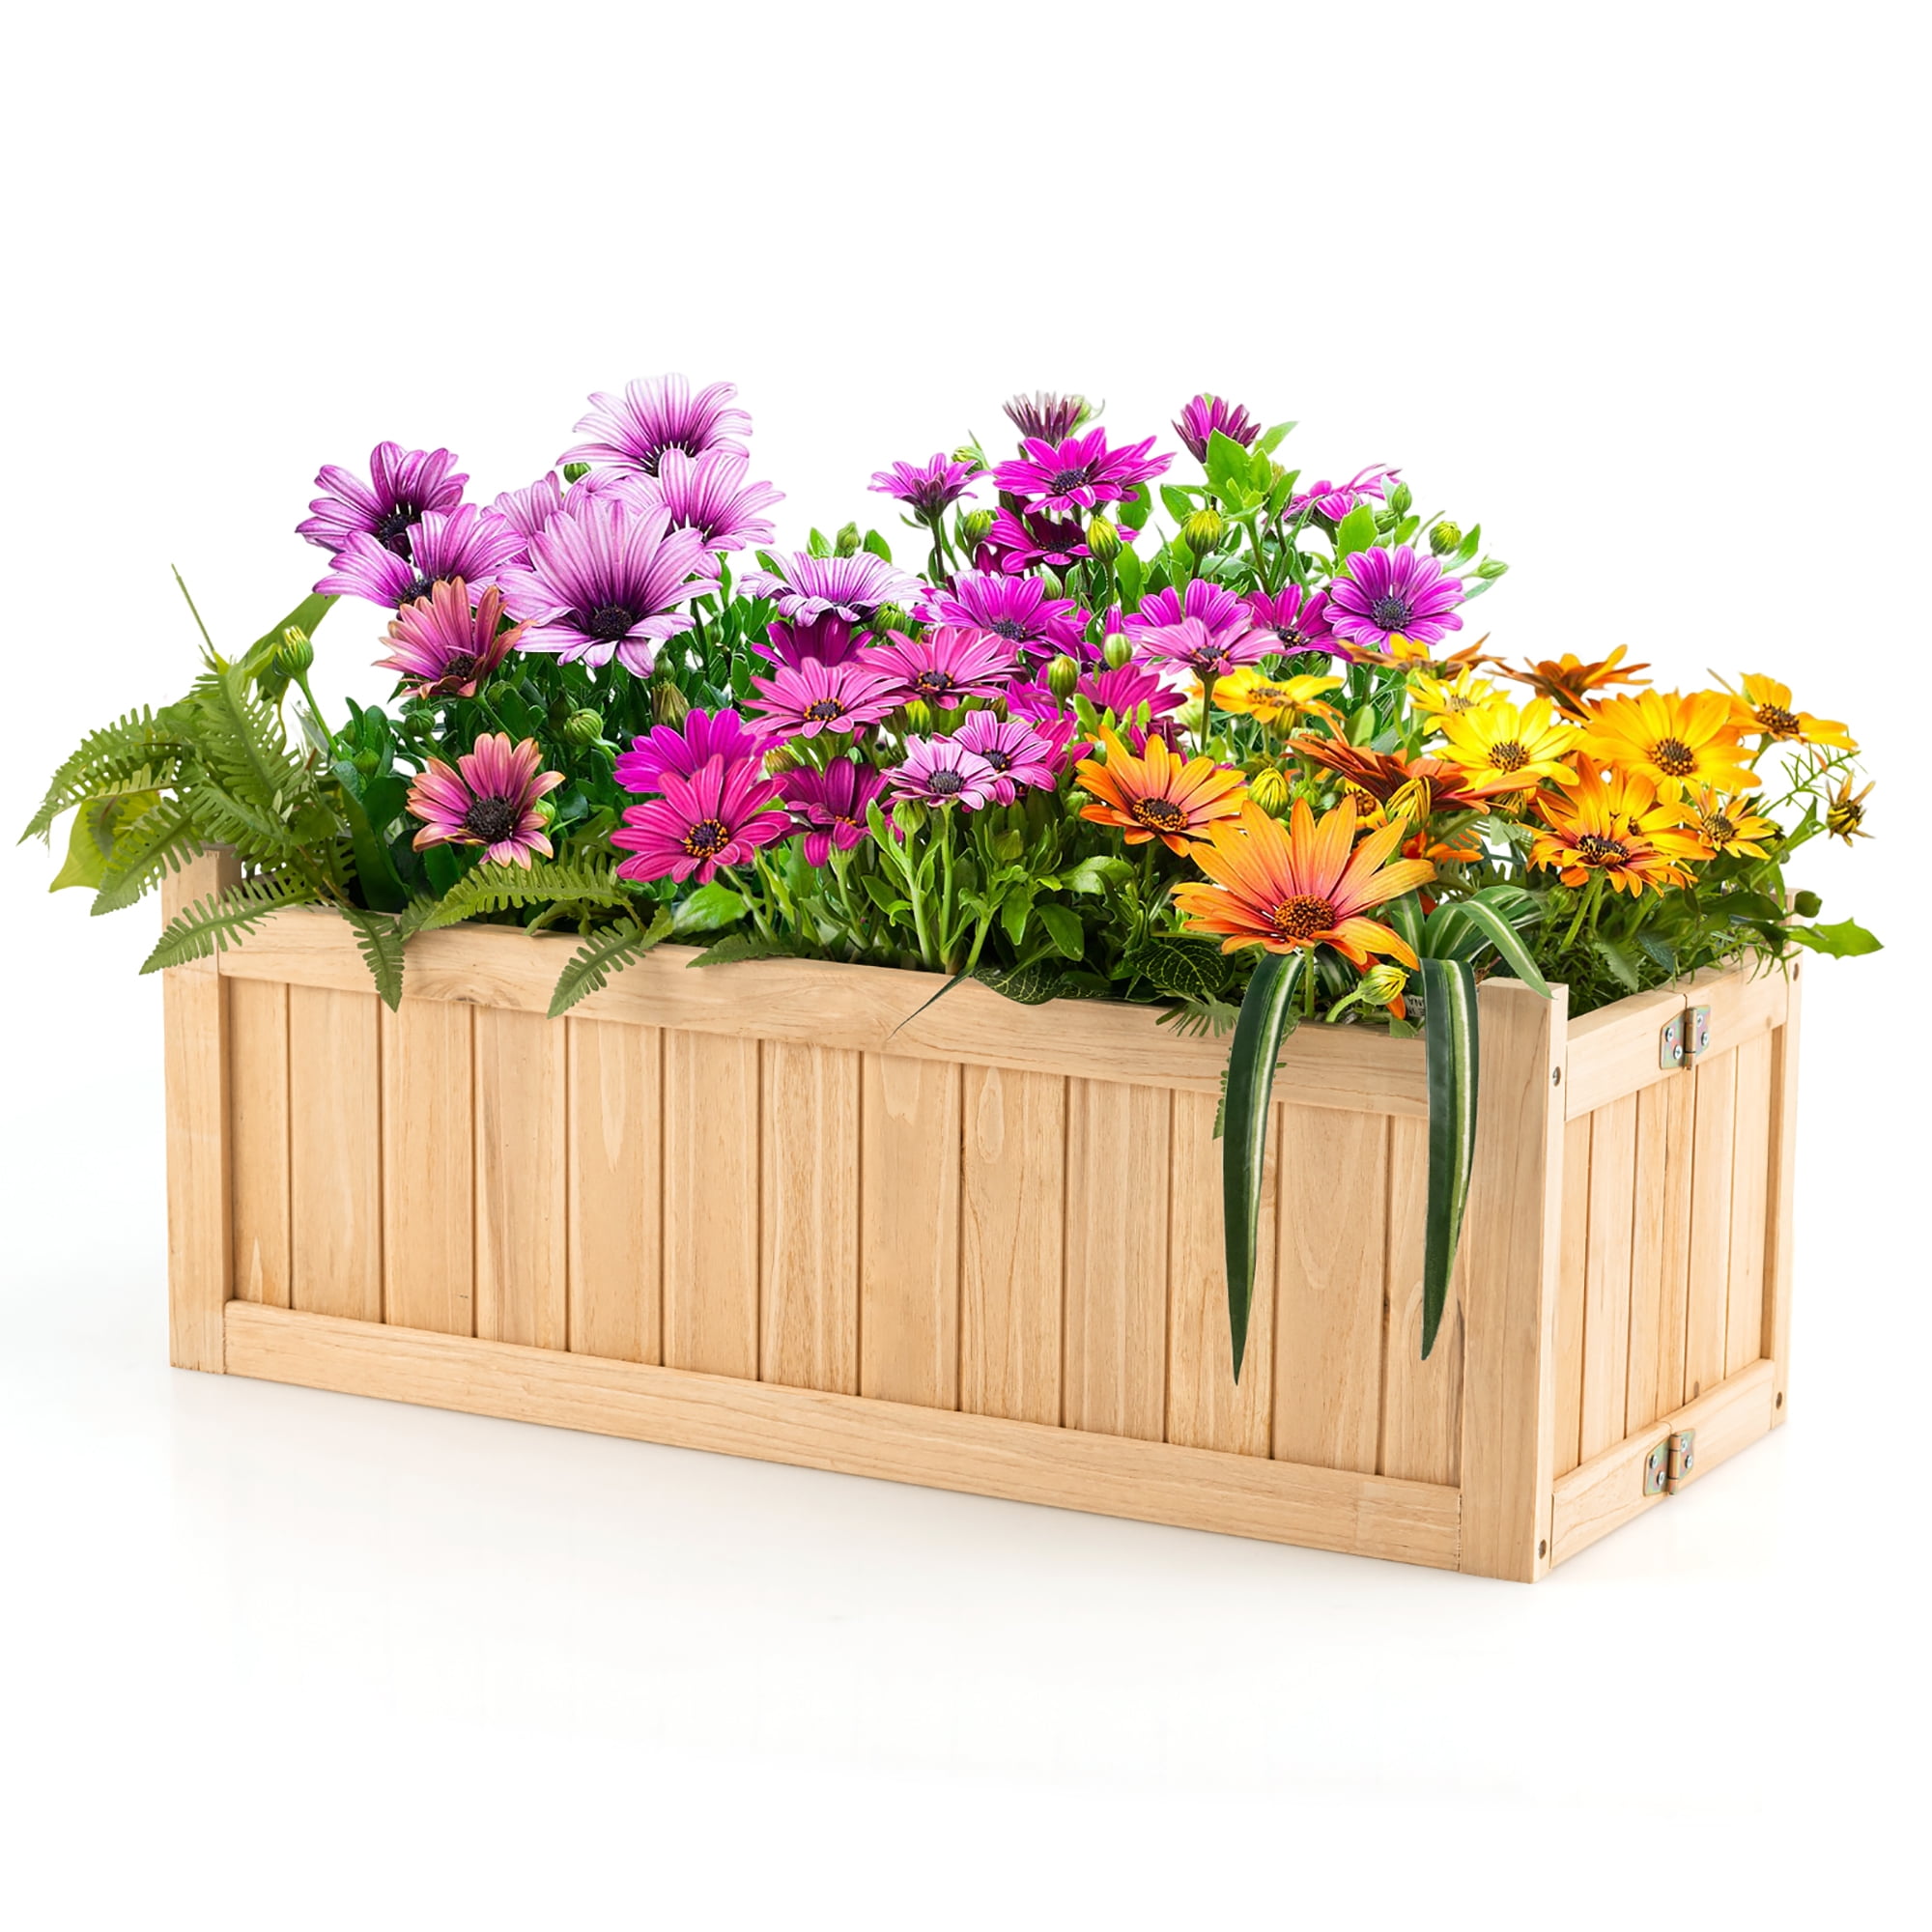 Image of Wooden planter box with flowers